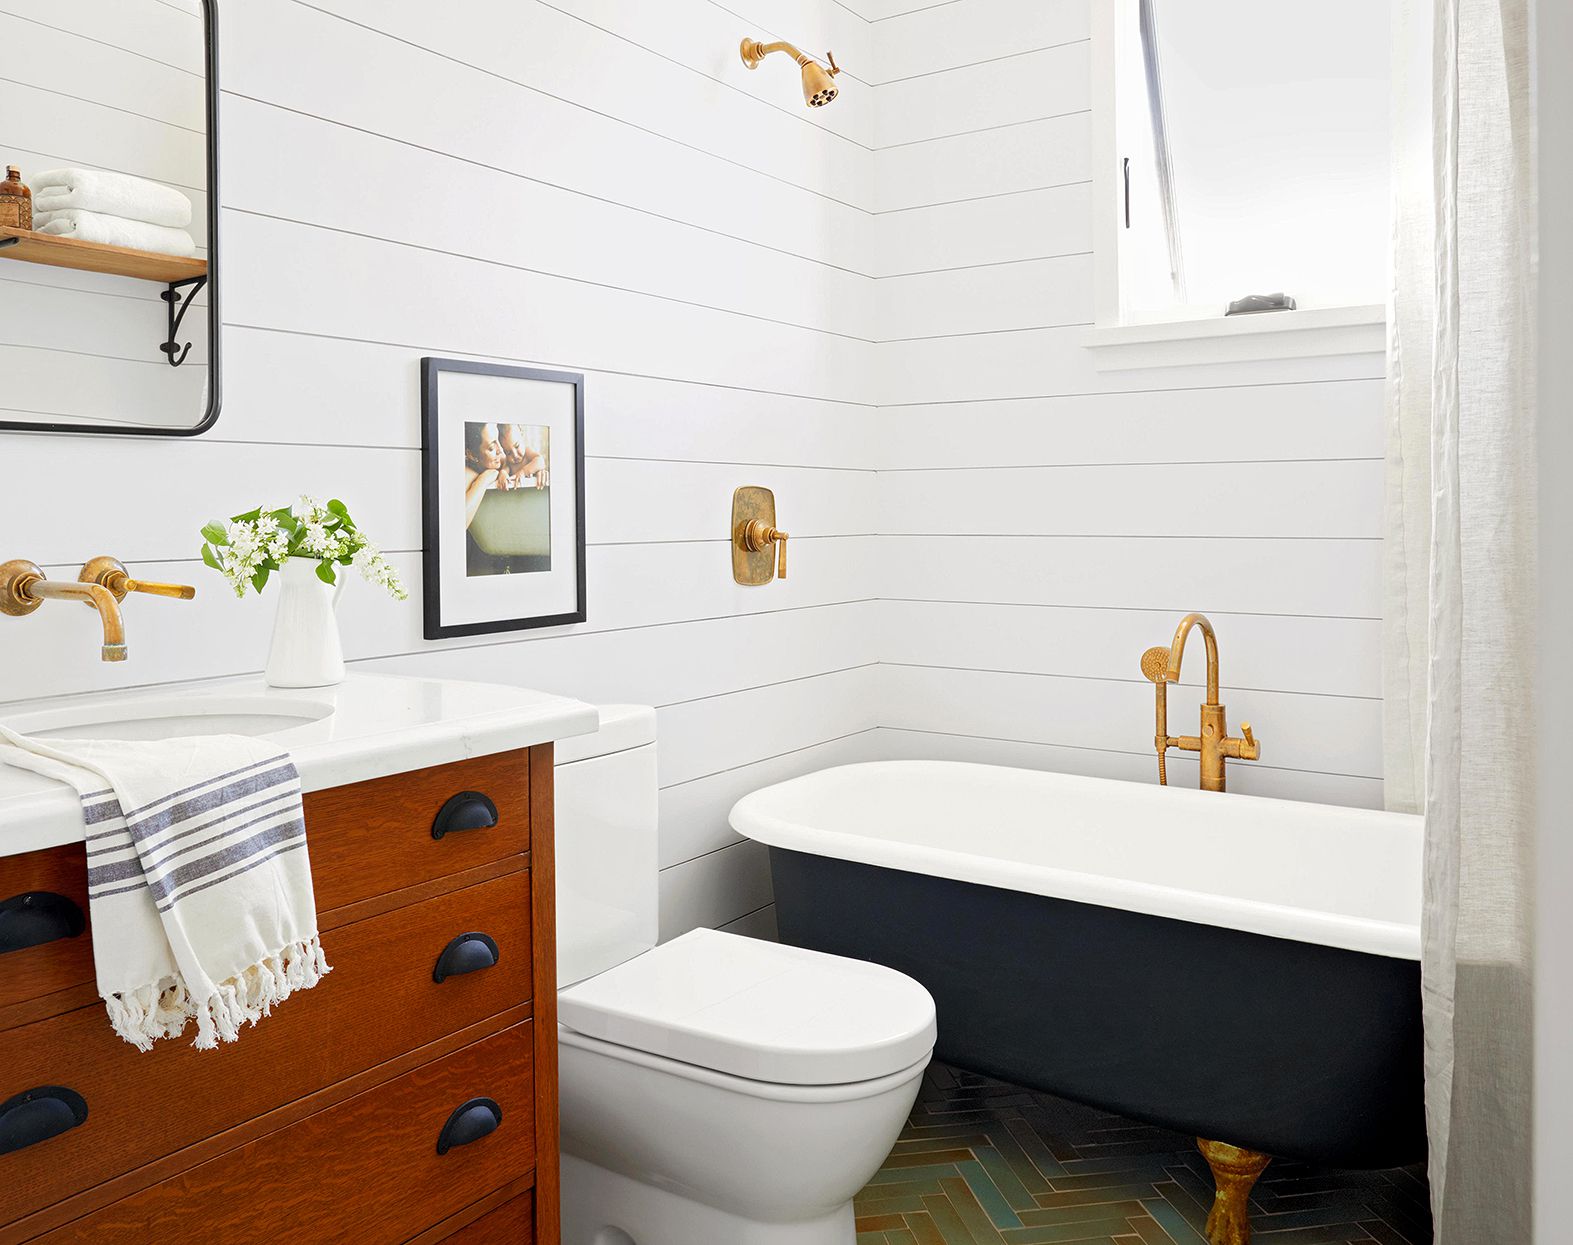 4 Simple Steps To Clean A Bathtub With Sparkling Results